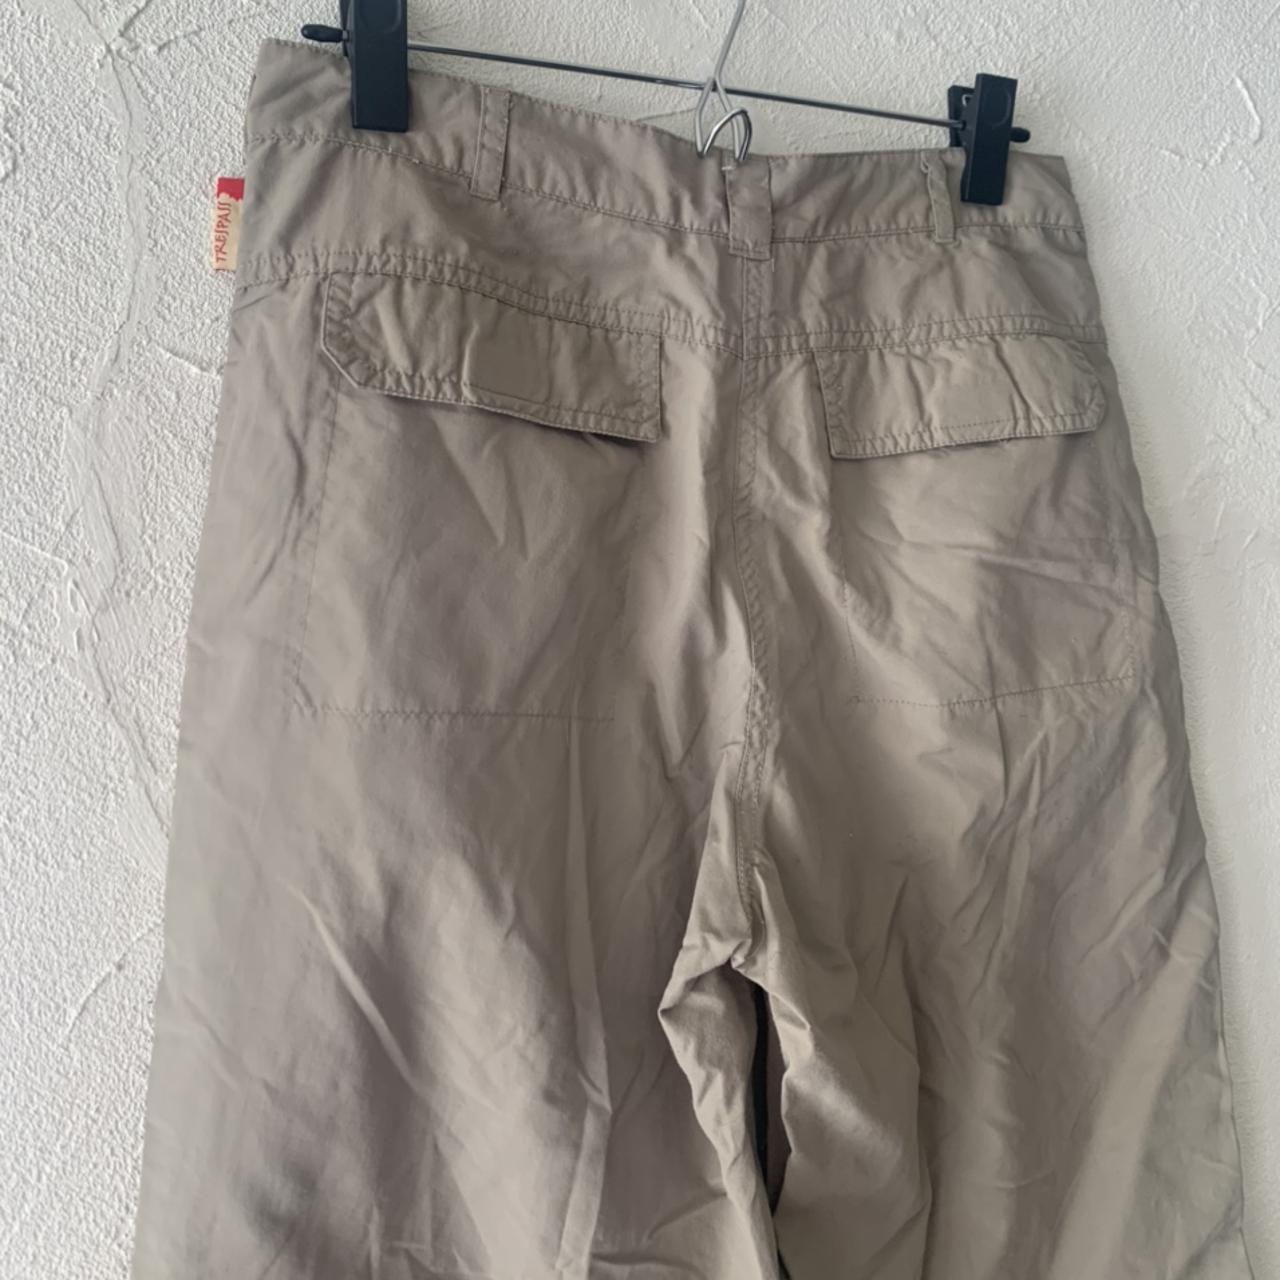 Product Image 3 - Vintage Trespass Outdoor Pants
No flaws
Size